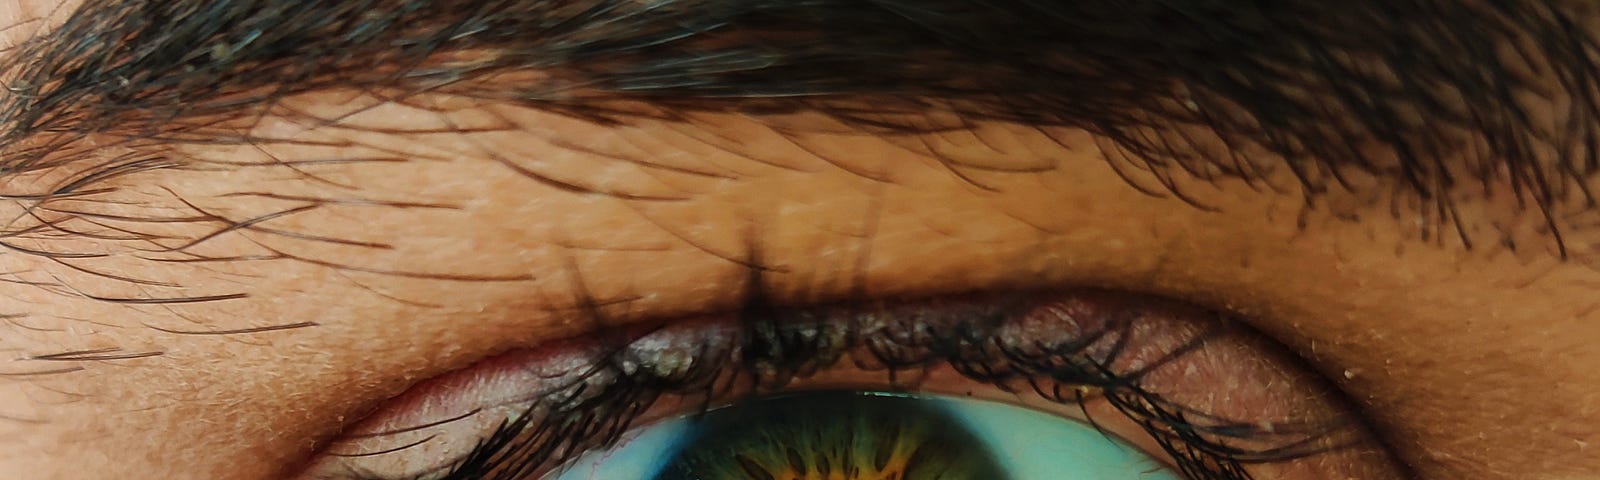 An extreme close-up photo of a man’s eye.